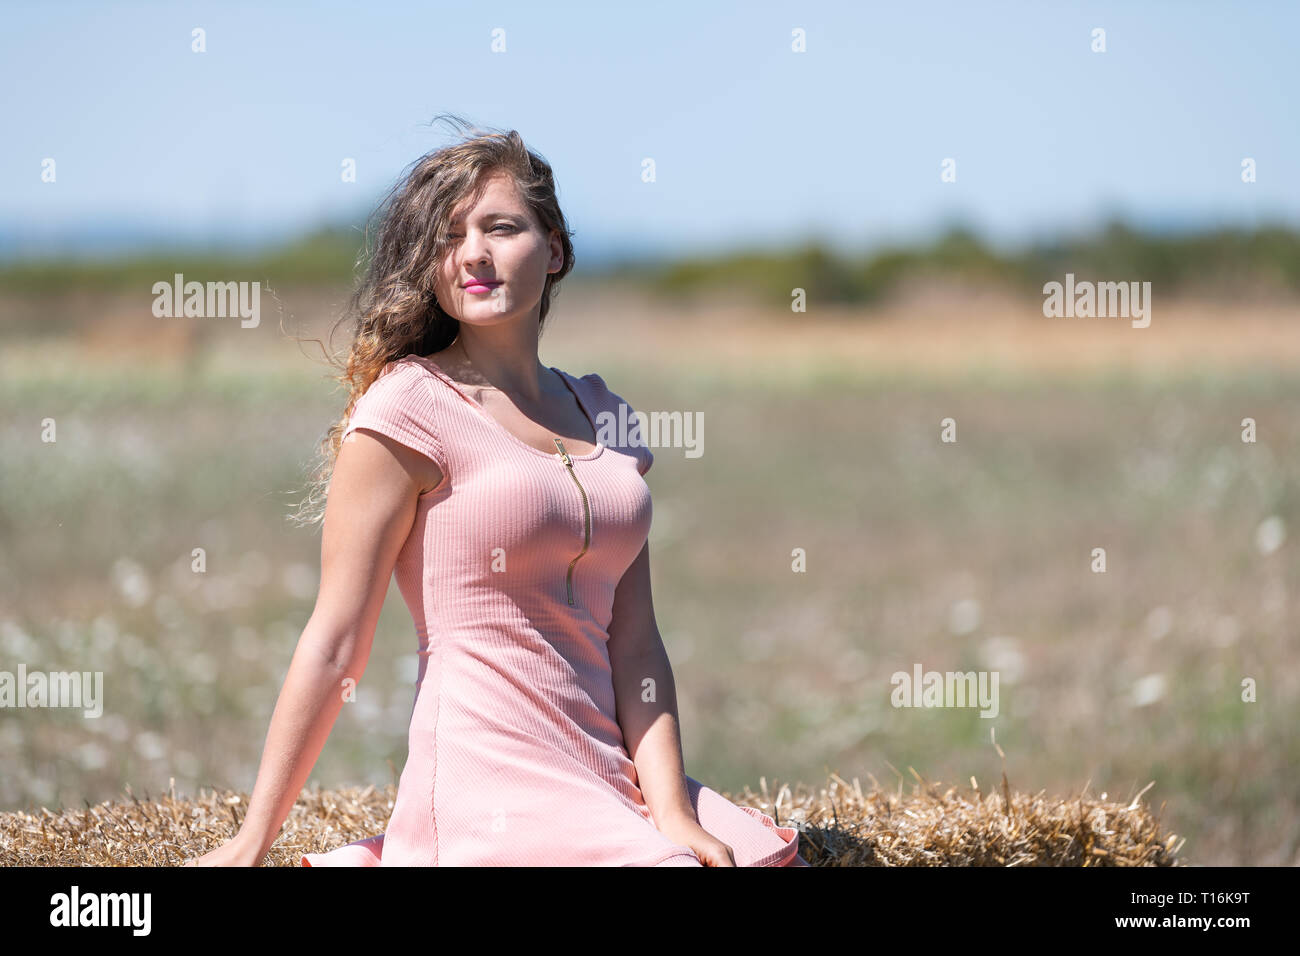 Countryside landscape in Tuscany, Italy with young girl woman sitting on hay bale in dress with hair in wind posing model Stock Photo